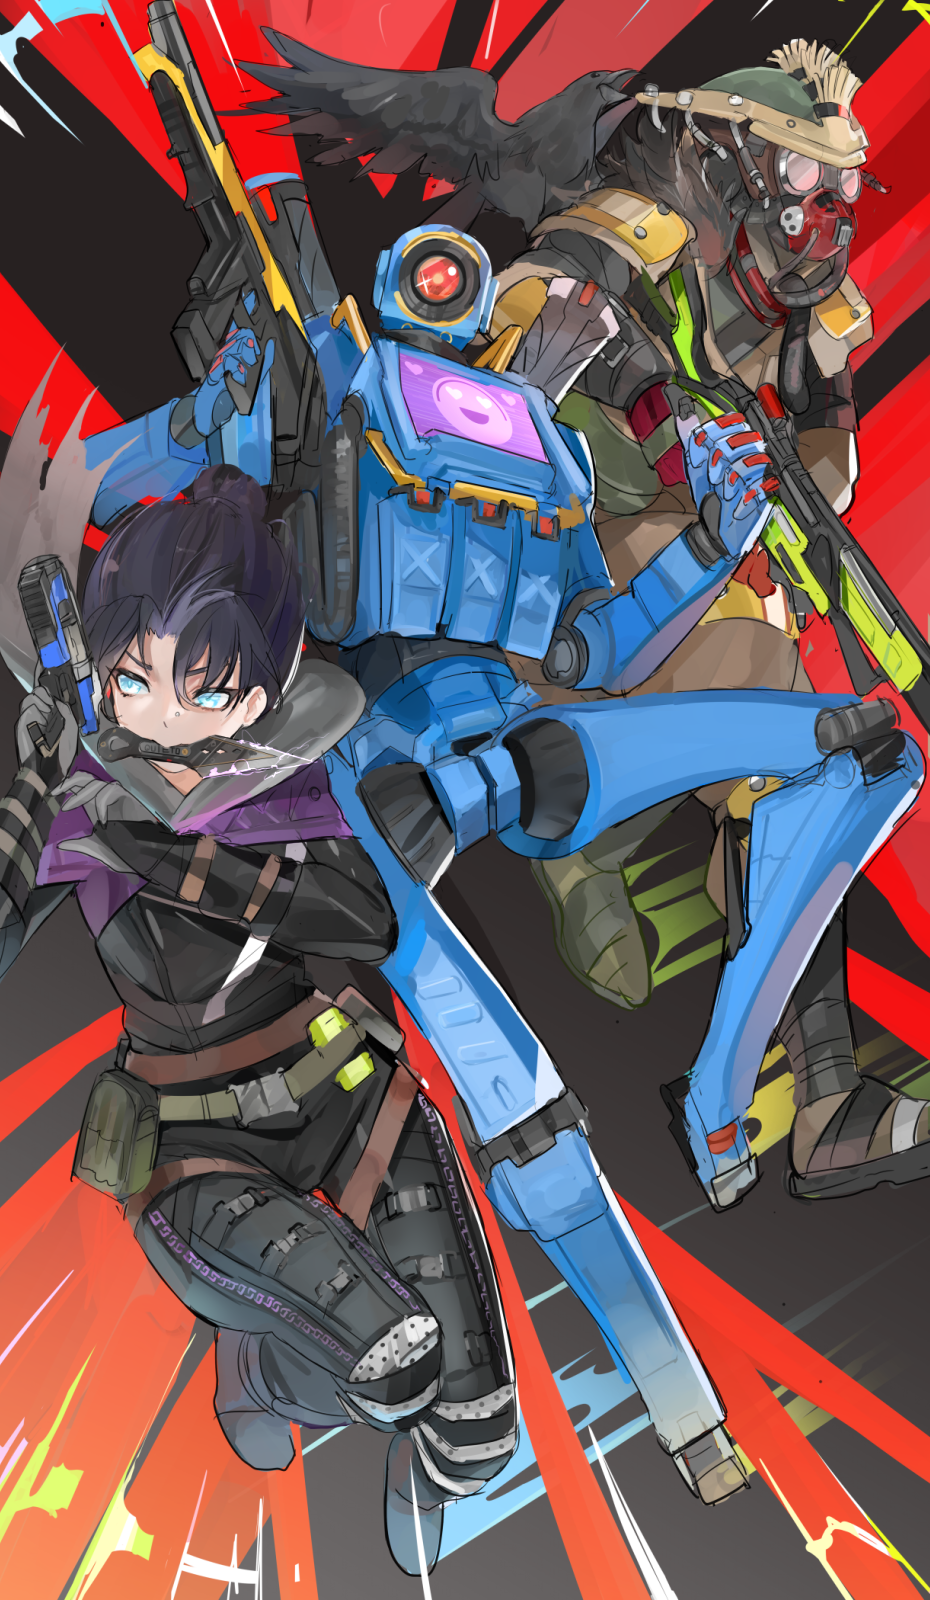 1boy 1girl 1other 30-30_repeater ambiguous_gender animal_on_shoulder apex_legends b3_wingman bird black_bodysuit bloodhound_(apex_legends) bodysuit brown_jacket brown_pants clenched_hand crow goggles gun handgun helmet highres holding holding_gun holding_weapon humanoid_robot jacket kik1 knee_pads kunai one-eyed pants pathfinder_(apex_legends) rebreather revolver rifle science_fiction sketch submachine_gun volt_smg weapon weapon_in_mouth wraith's_kunai wraith_(apex_legends)